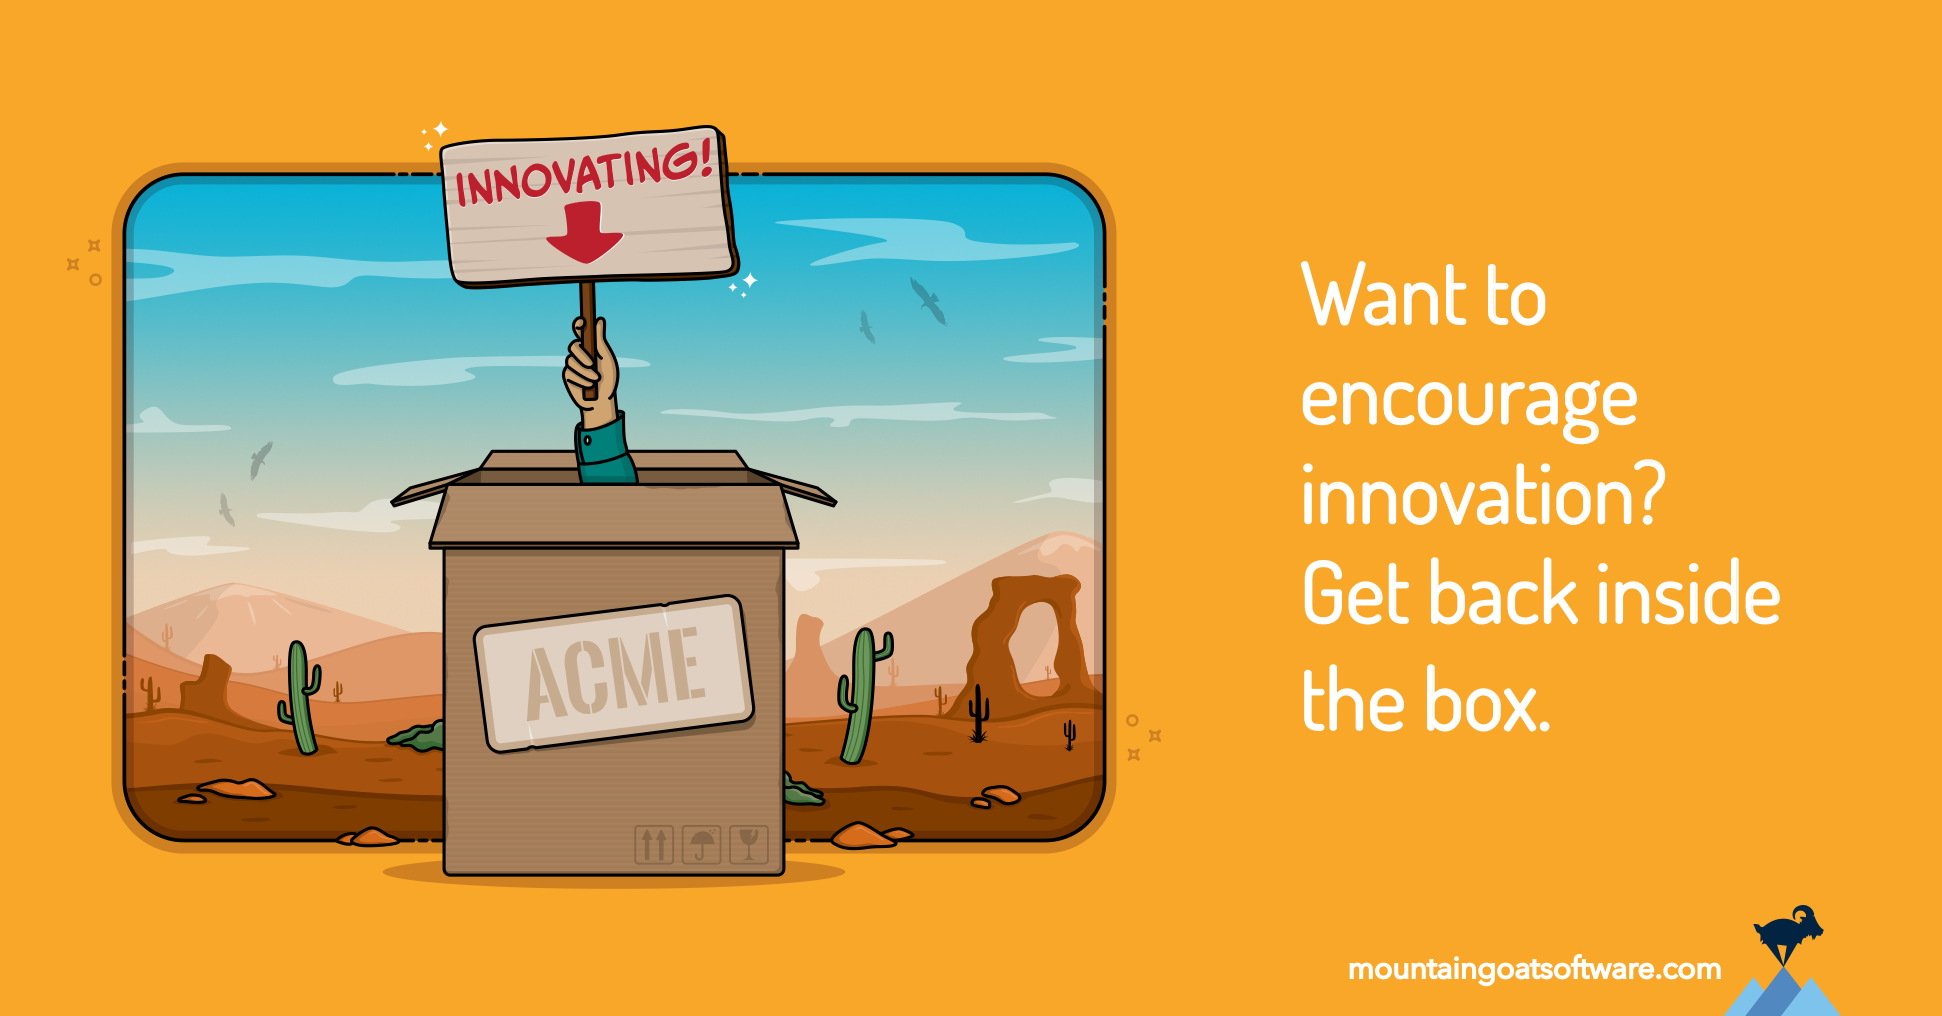 Want to encourage innovation? Get back inside the box. Next to this quote, an arm pokes up out of the top of an acme box somewhere in the American Southwest. The hand is holding a sign that says 